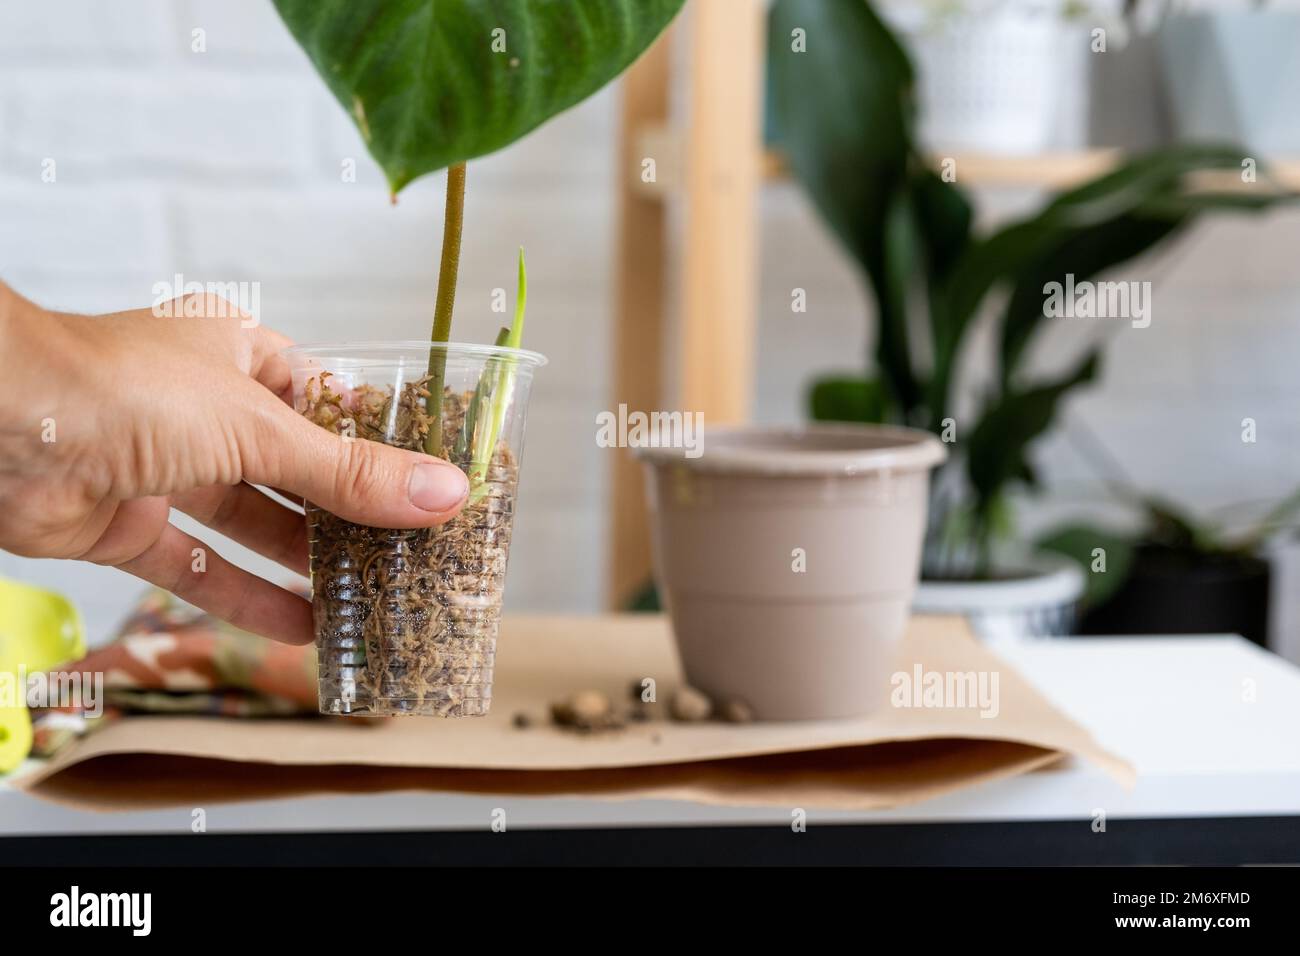 Reproduction and transplanting a home plant Philodendron verrucosum into a pot. A woman plants a stalk with roots in a new soil, Stock Photo